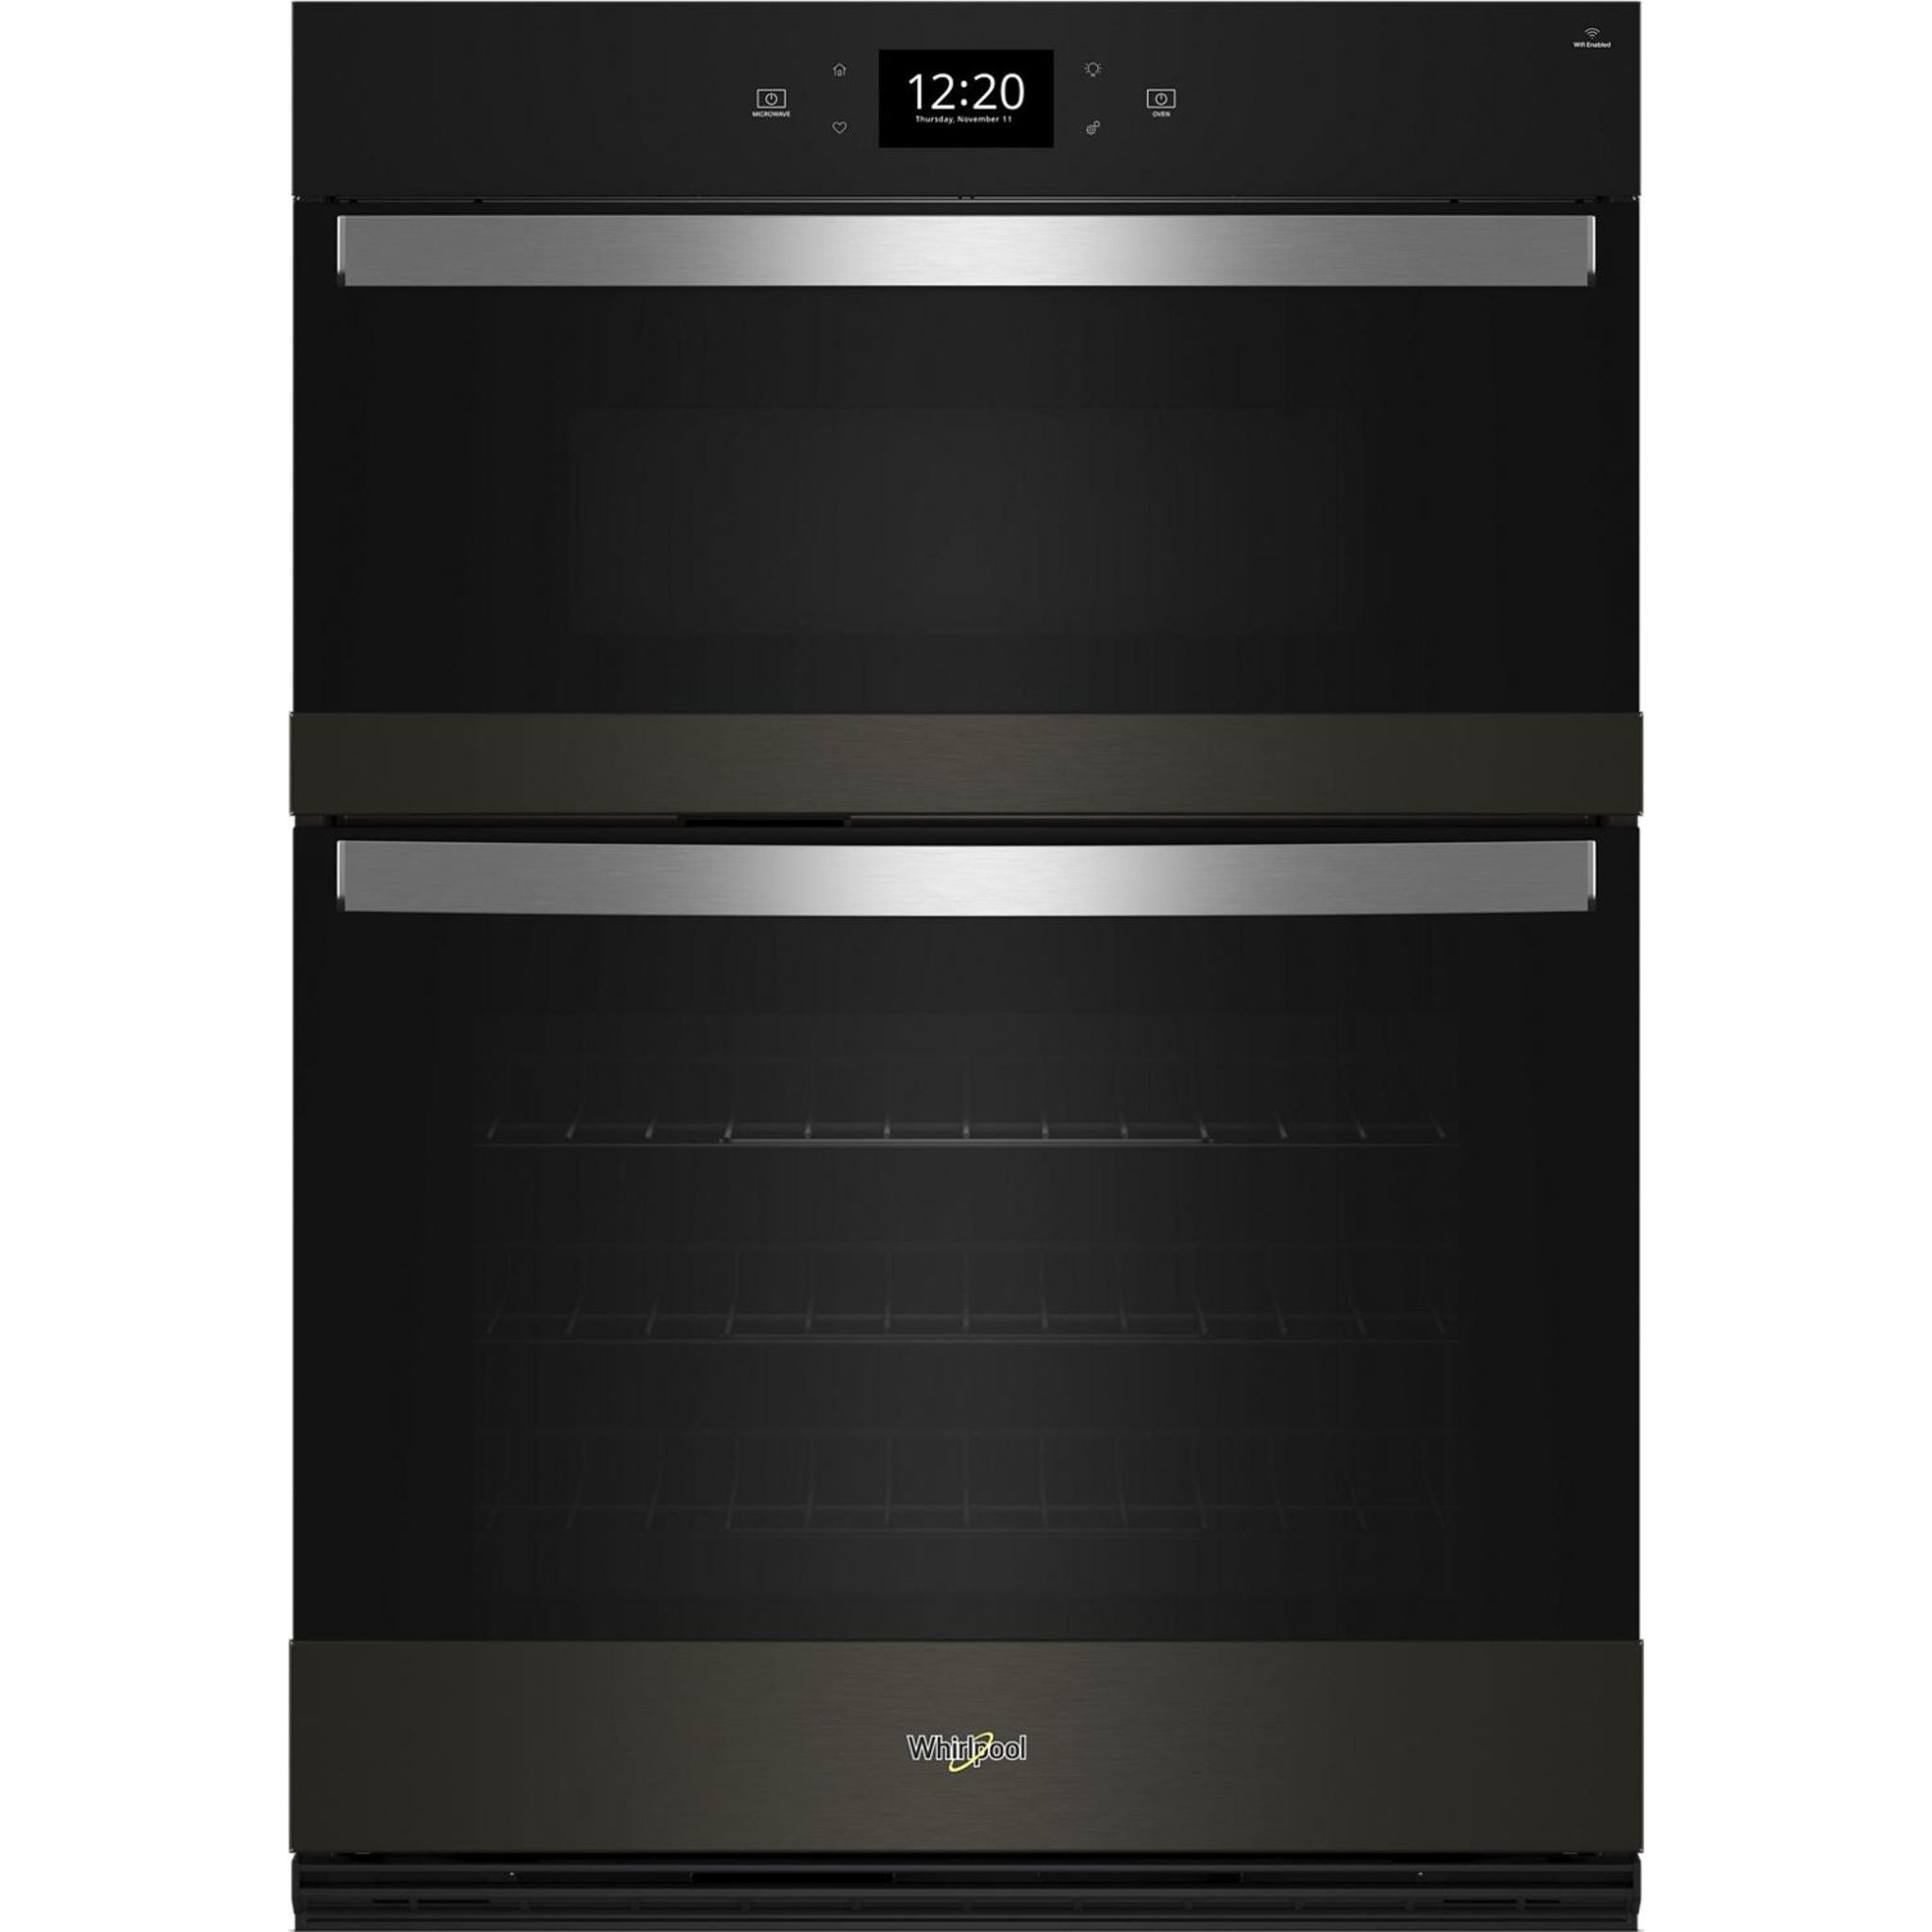 Whirlpool, 30" True Convection Wall Oven (WOEC7030PV) - Black Stainless Steel with PrintShield™ Finish